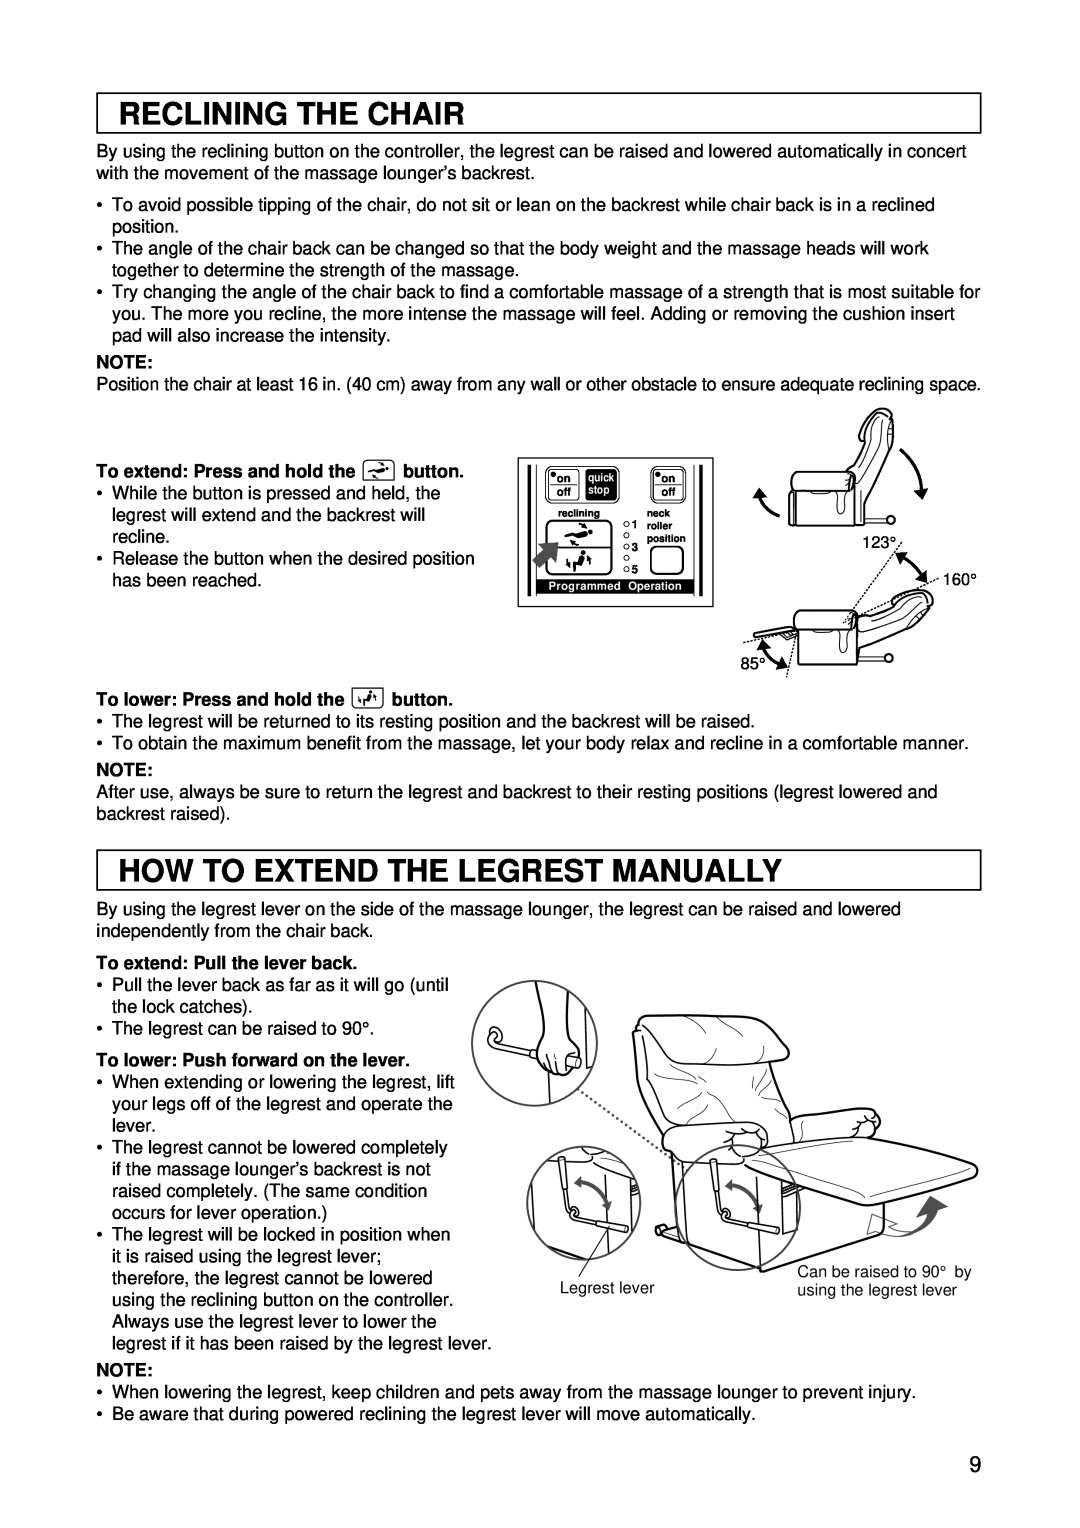 Panasonic EP1015 Reclining The Chair, How To Extend The Legrest Manually, To extend Press and hold the button 